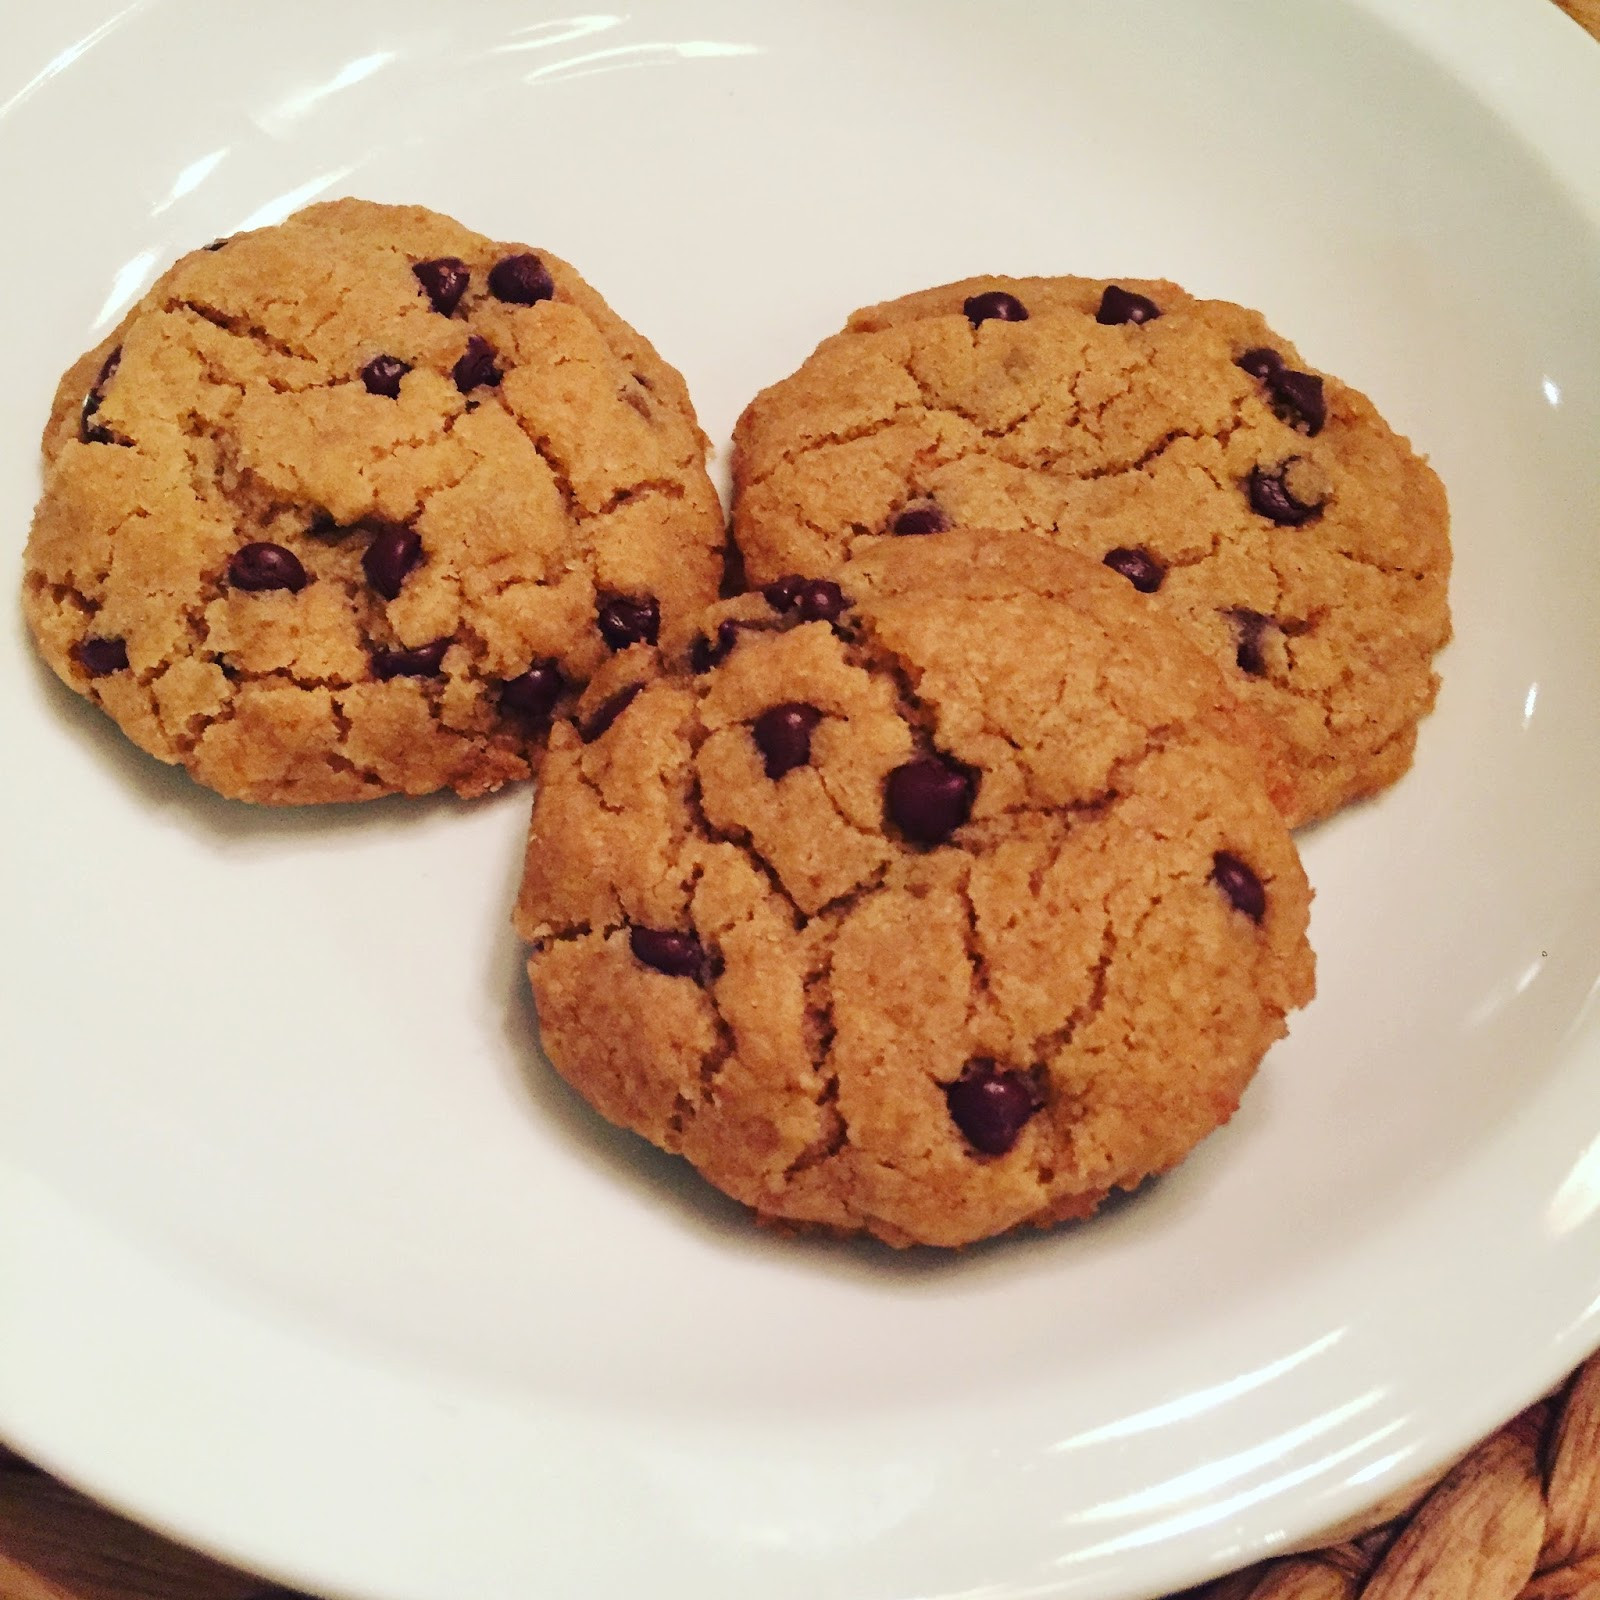 Dairy Free Egg Free Chocolate Chip Cookies
 Simply LKJ Gluten Dairy Soy Egg and Nut Free Chocolate